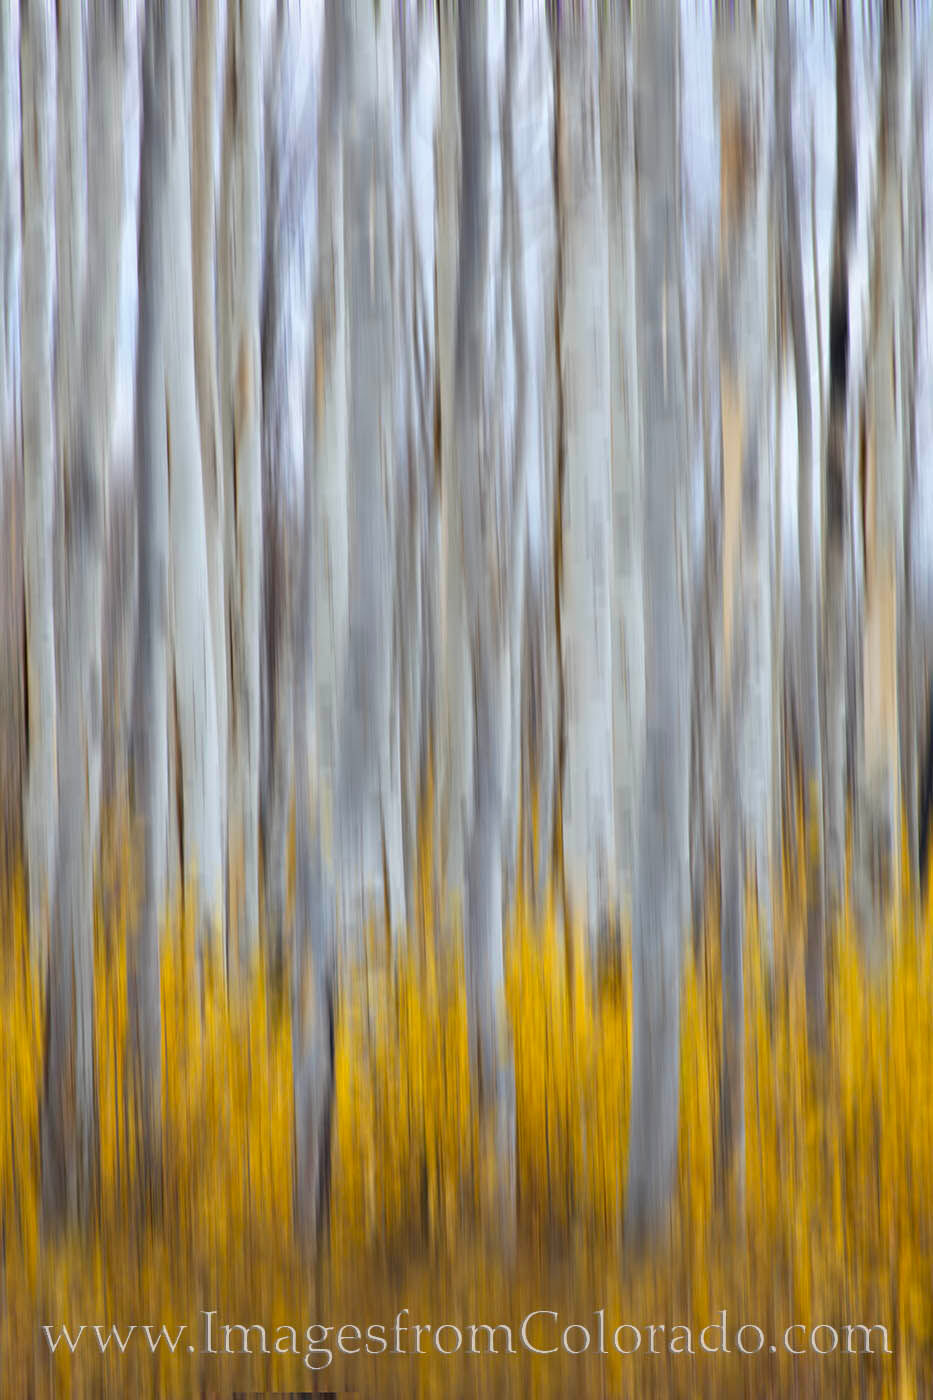 Aspen trunks rise from the golden ground cover of Autumn on a cold October day near Grand Lake, Colorado